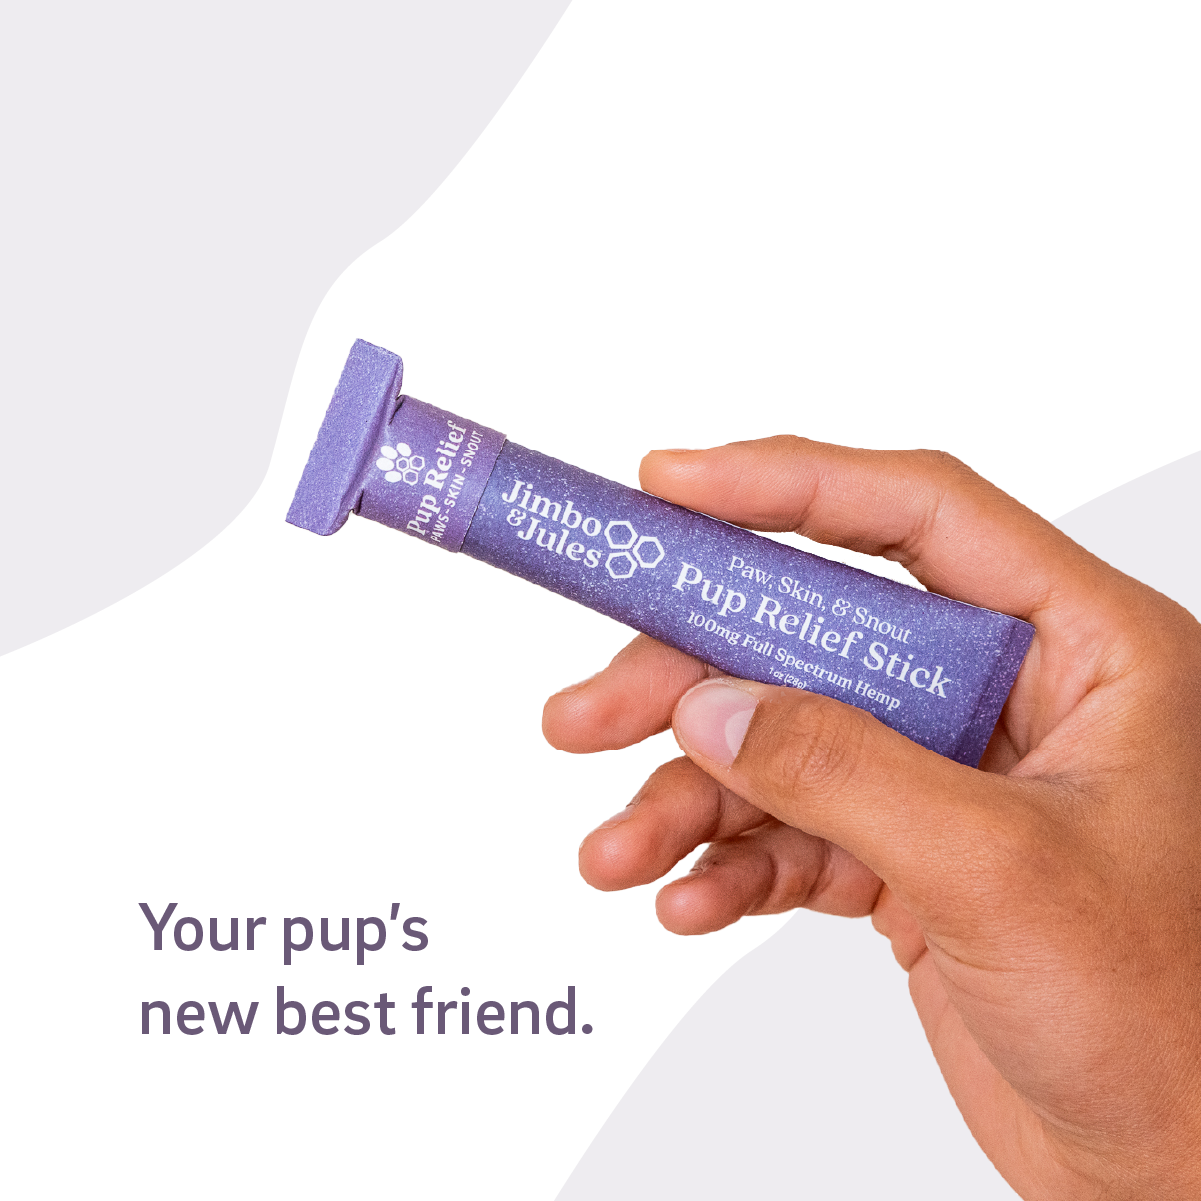 Pup Relief Stick